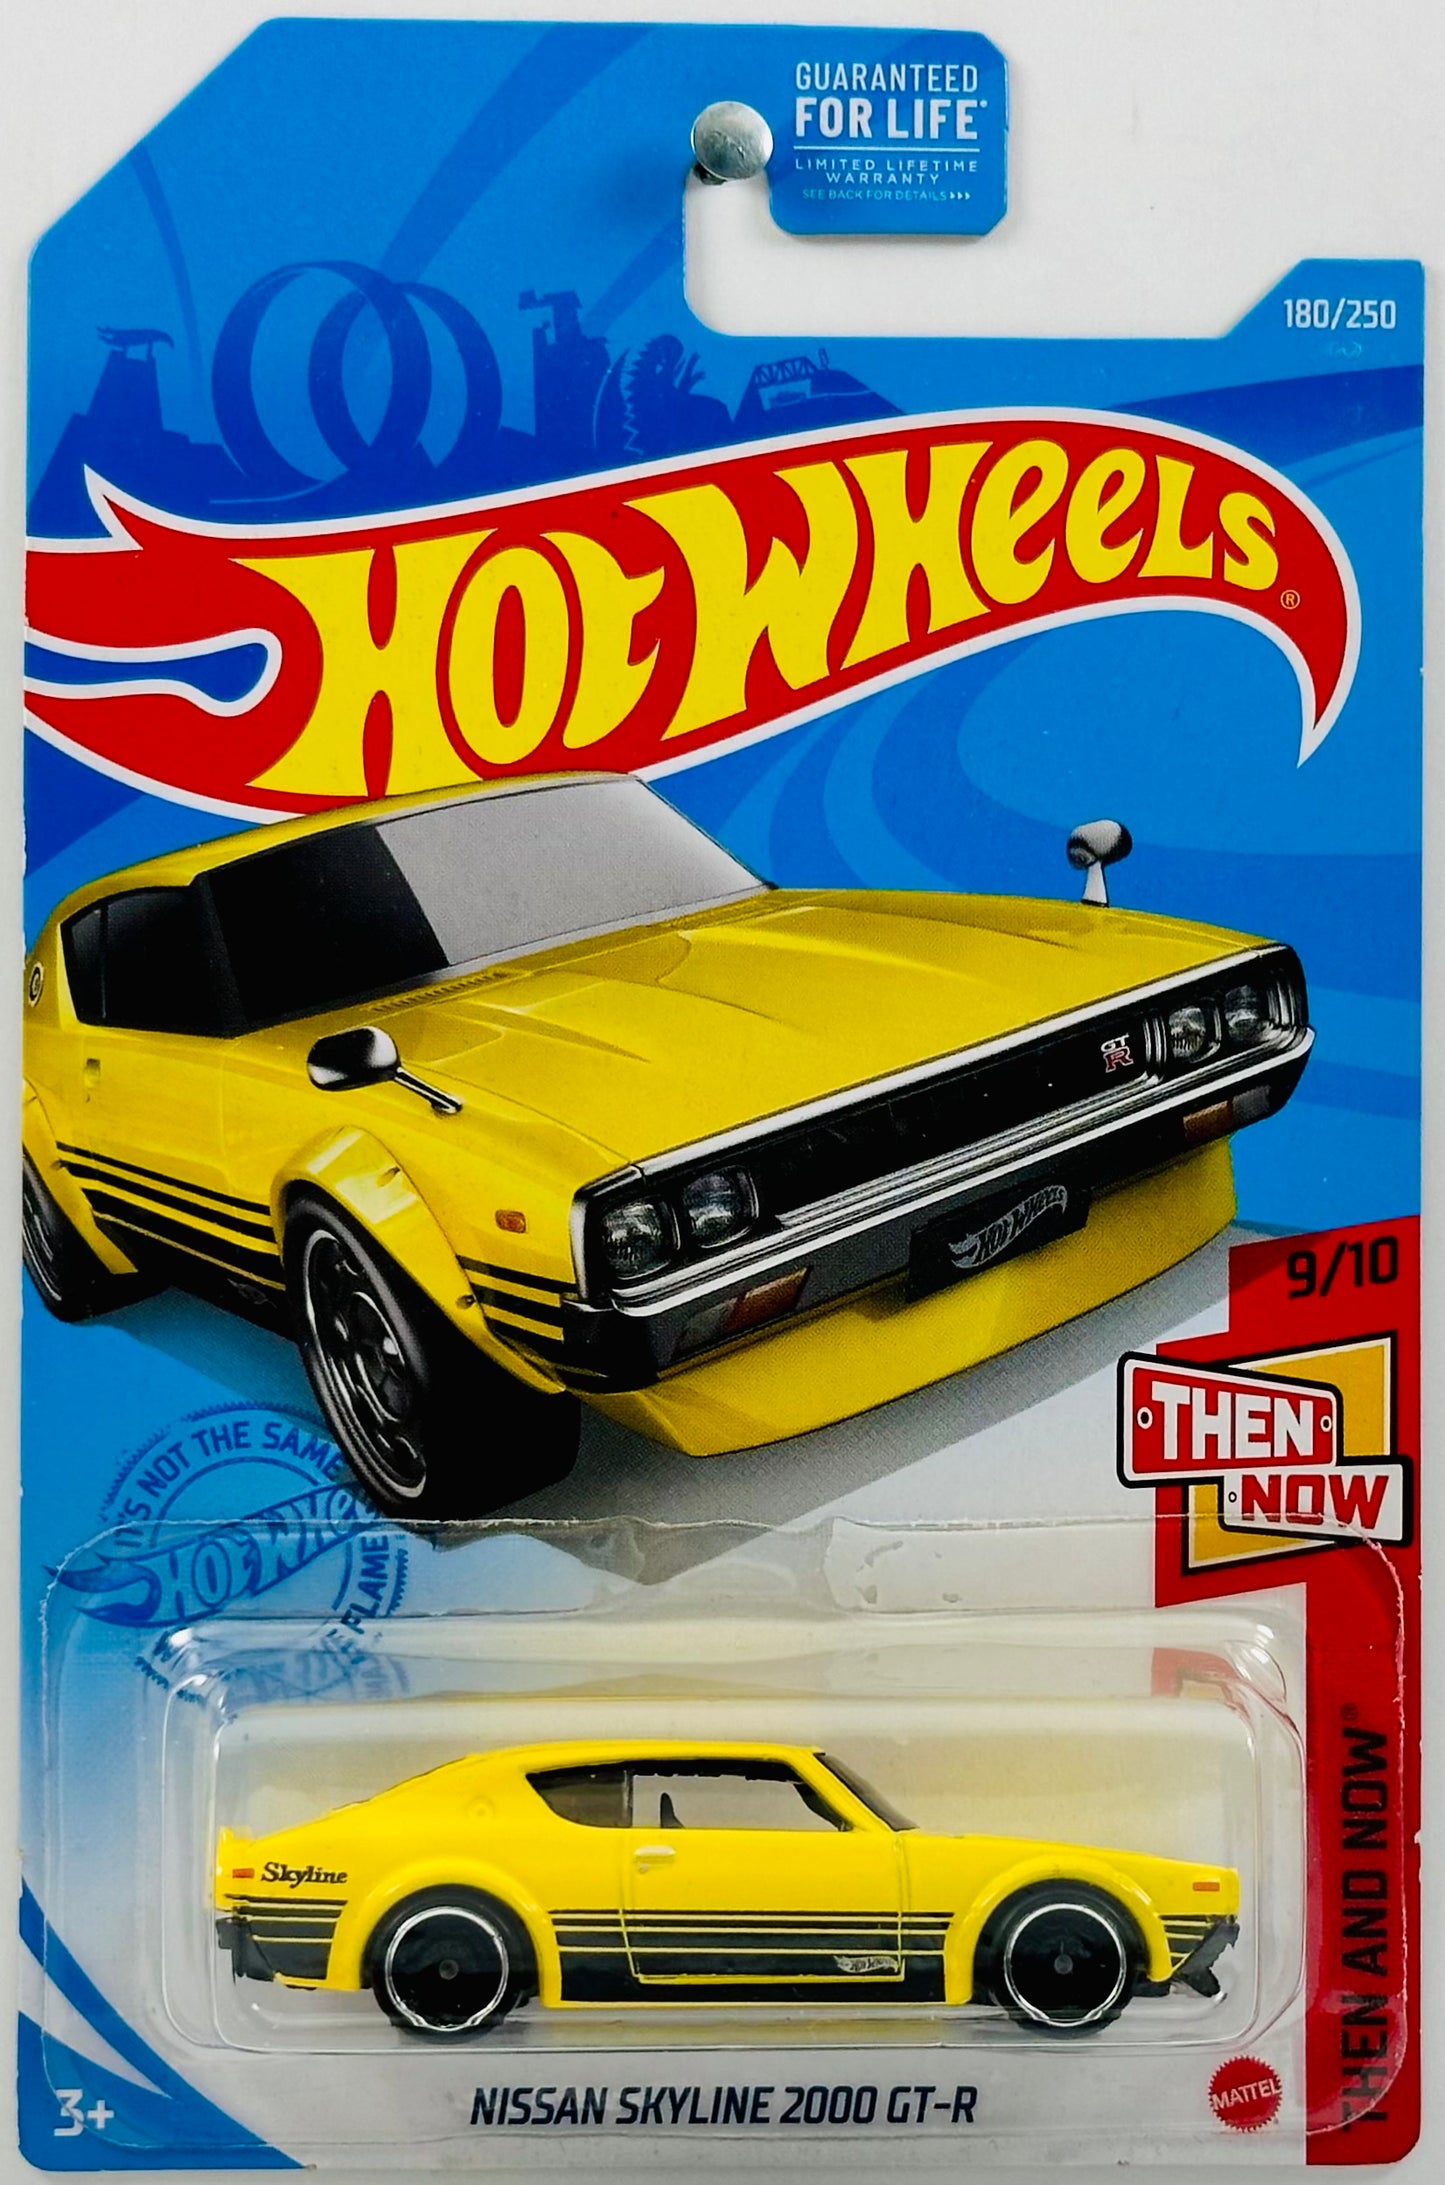 Hot Wheels 2021 - Collector # 180/250 - Then And Now 09/10 - Nissan Skyline 2000 GT-R - Yellow - USA